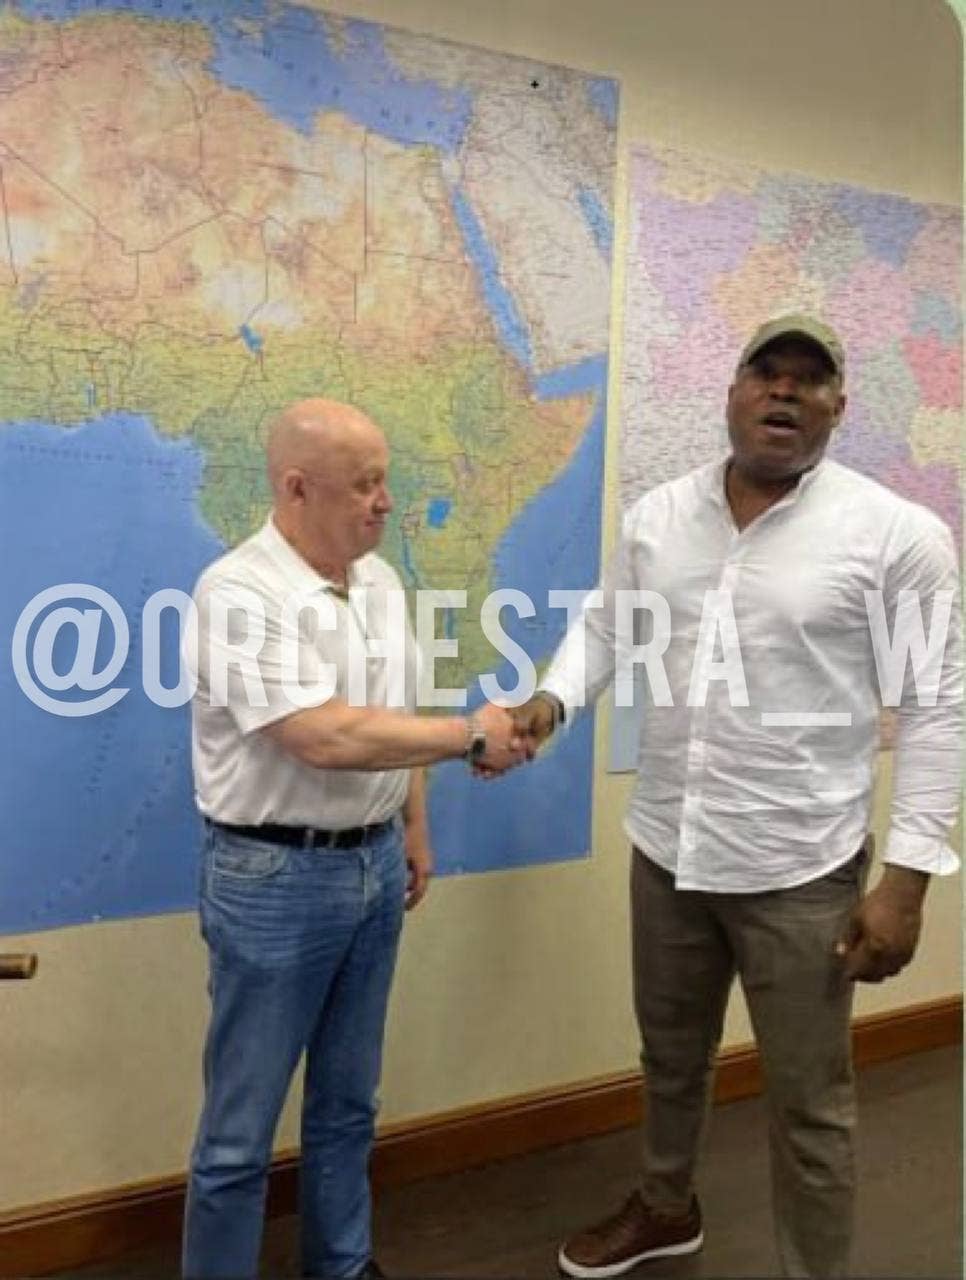 Wagner leader Yevgeny Prigozin met with African officials and business leaders according to a Telegram channel associated with Wagner. (Orchestra W Telegram photo)